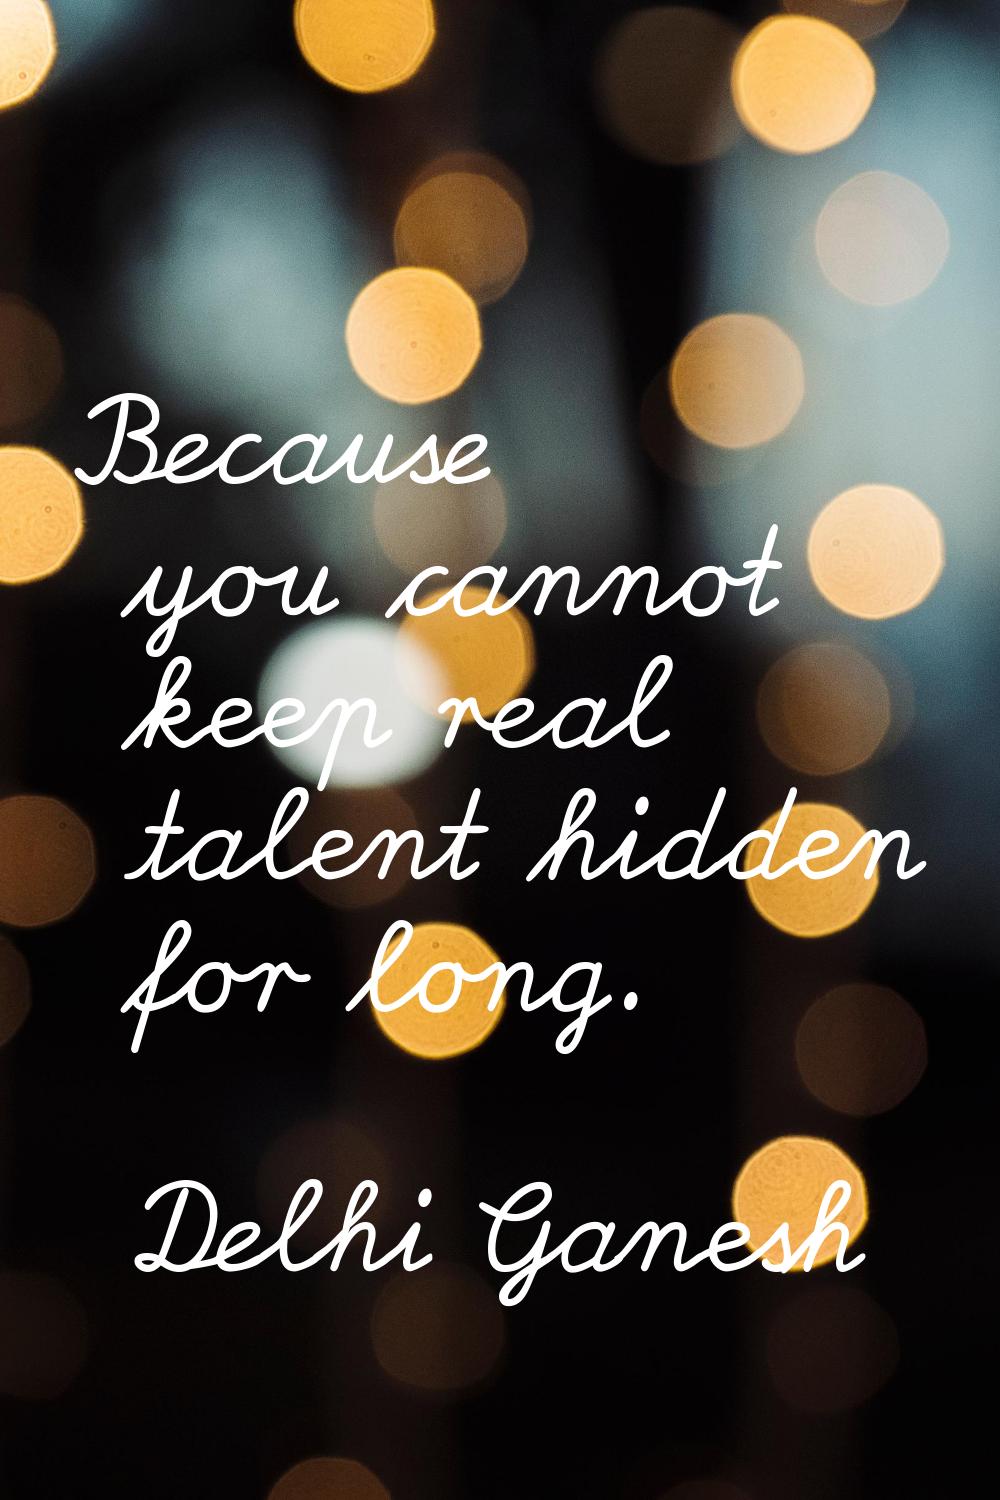 Because you cannot keep real talent hidden for long.